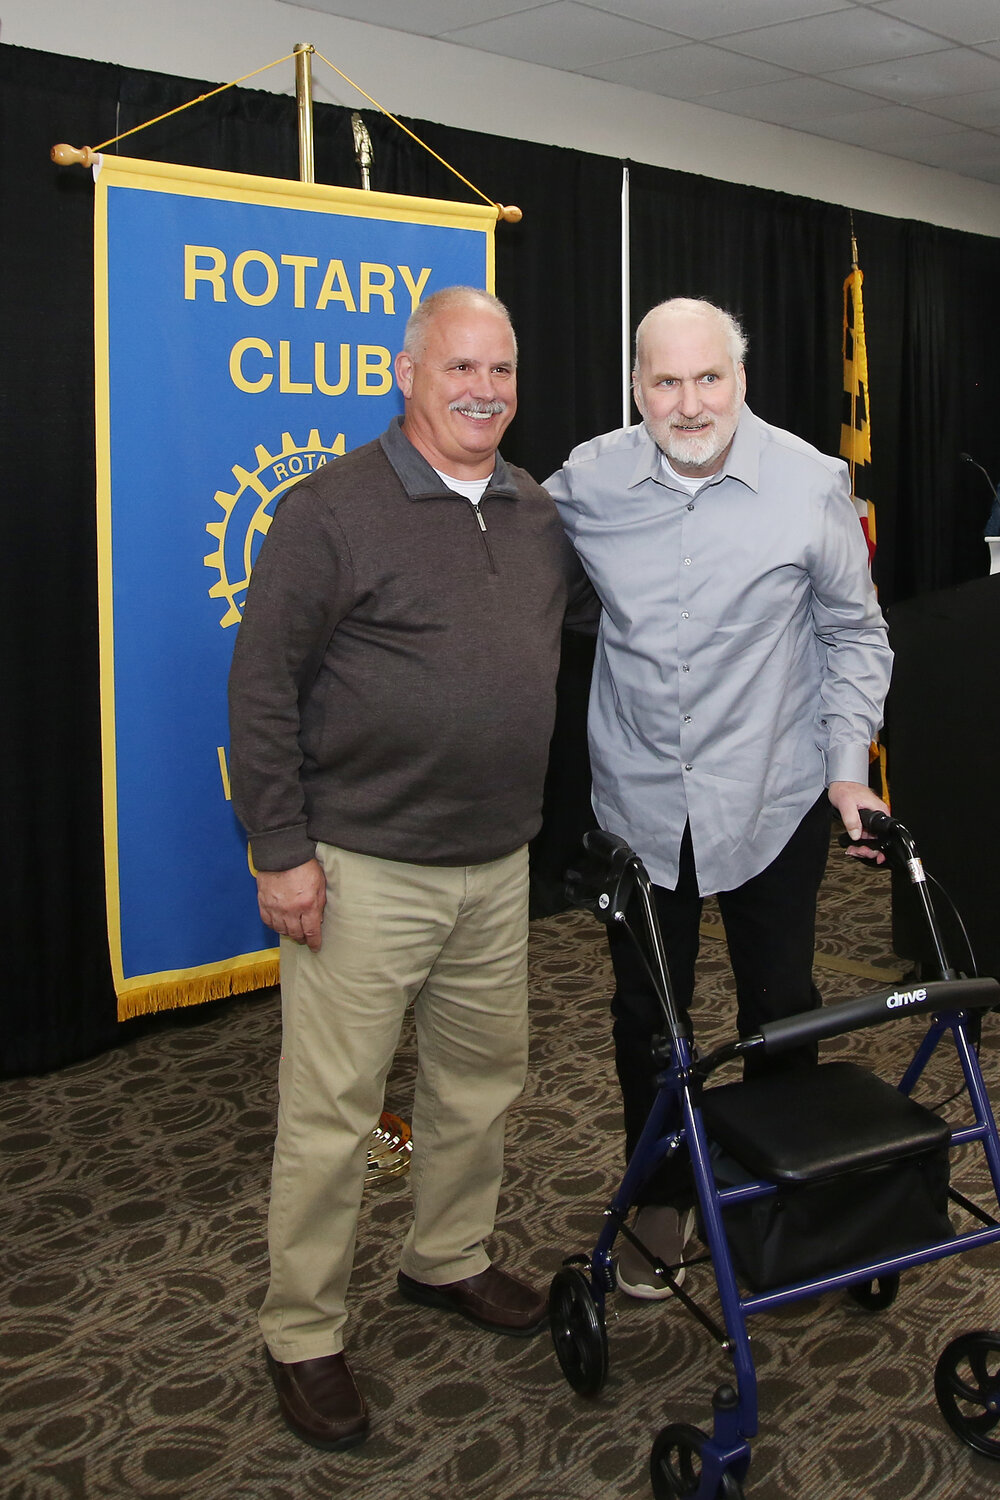 The Rotary Club of Wicomico honored Bill Suess, left, for rescuing Darryl Remedio, right, after he fell into a lagoon near his residence in Worcester County.